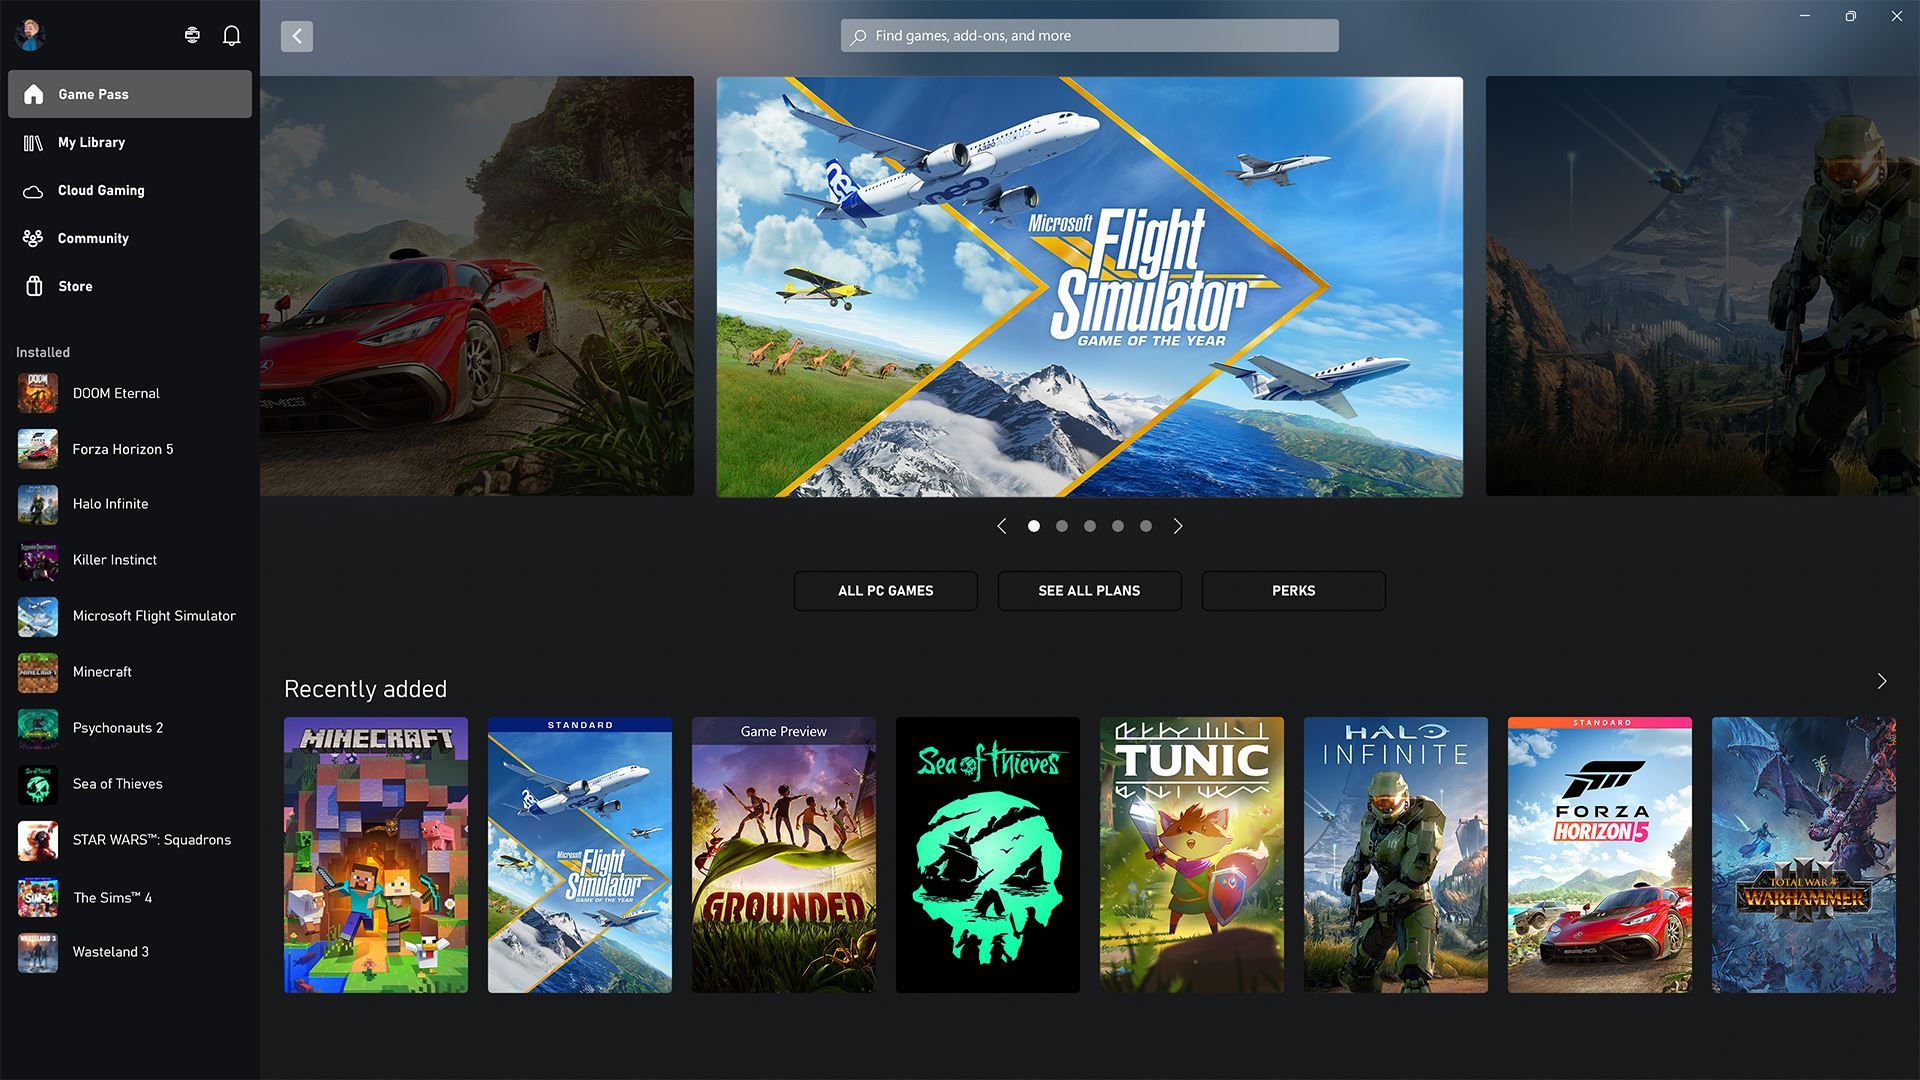 The Xbox App on PC in 2022: Great Games and Improved Performance - Xbox Wire